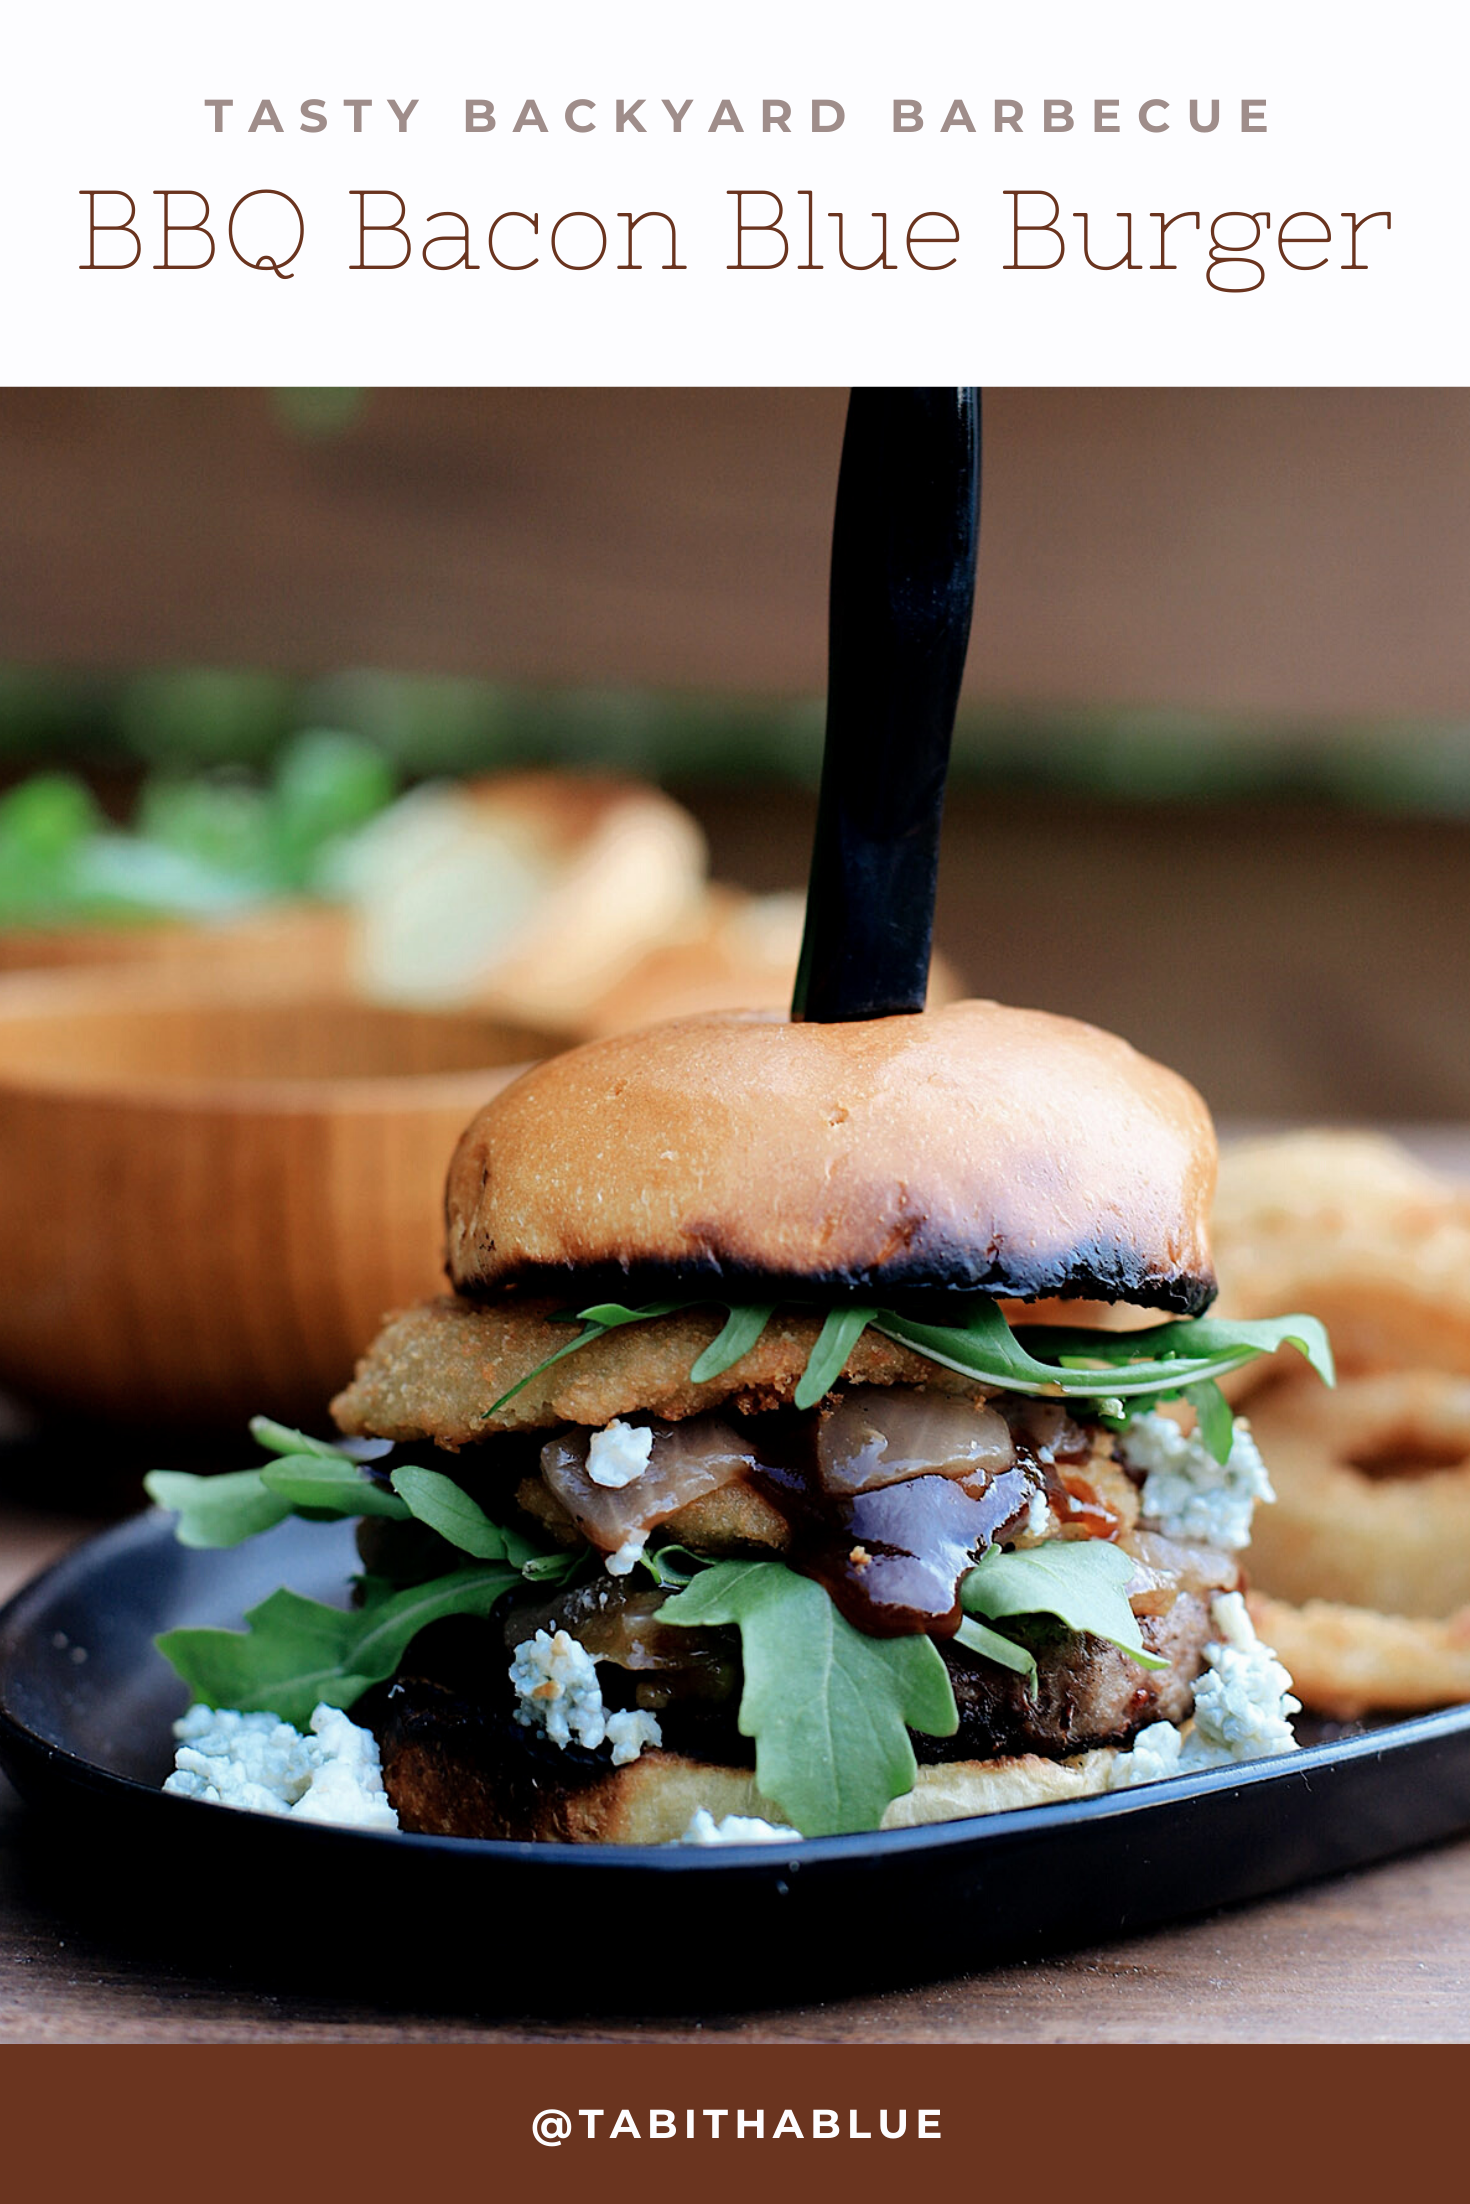 BBQ Bacon Blue Burger for a Tasty Backyard Barbecue. Not your average burger! Juicy beef burgers seasoned with a the perfect amount of spice, topped with smoked bacon jam, sweet bourbon onions, arugula, blue cheese, onion rings, BBQ sauce and a buttery grilled bun! | BBQ Burger by popular Florida lifestyle blog, Fresh Mommy Blog: Pinterest image of a BBQ Burger with bacon and blue cheese. 